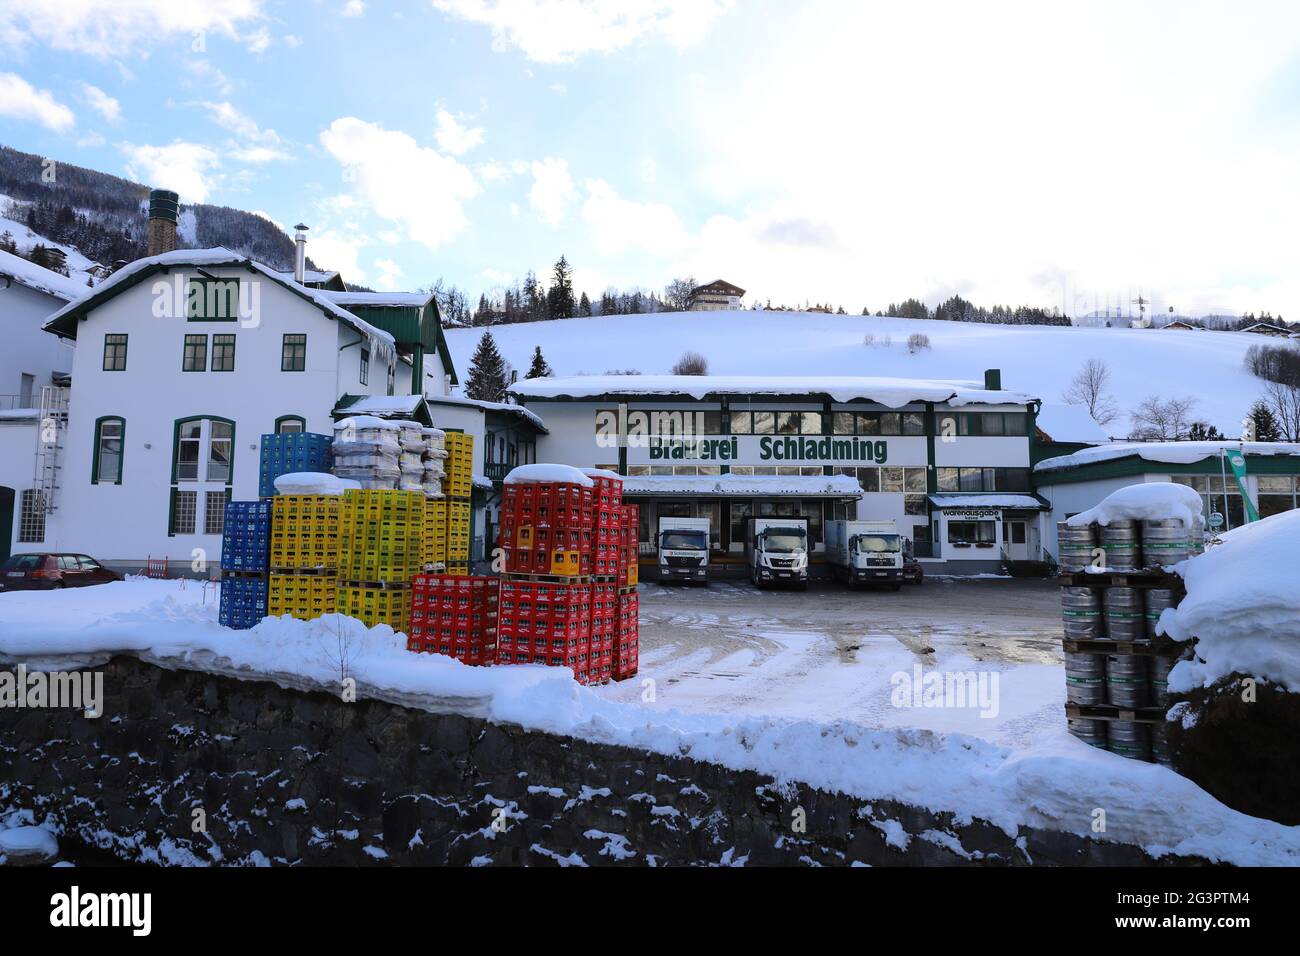 AUSTRIA, STYRIA, SCHLADMING - JANUARY 18, 2019: Beer brewery in Schladming Stock Photo